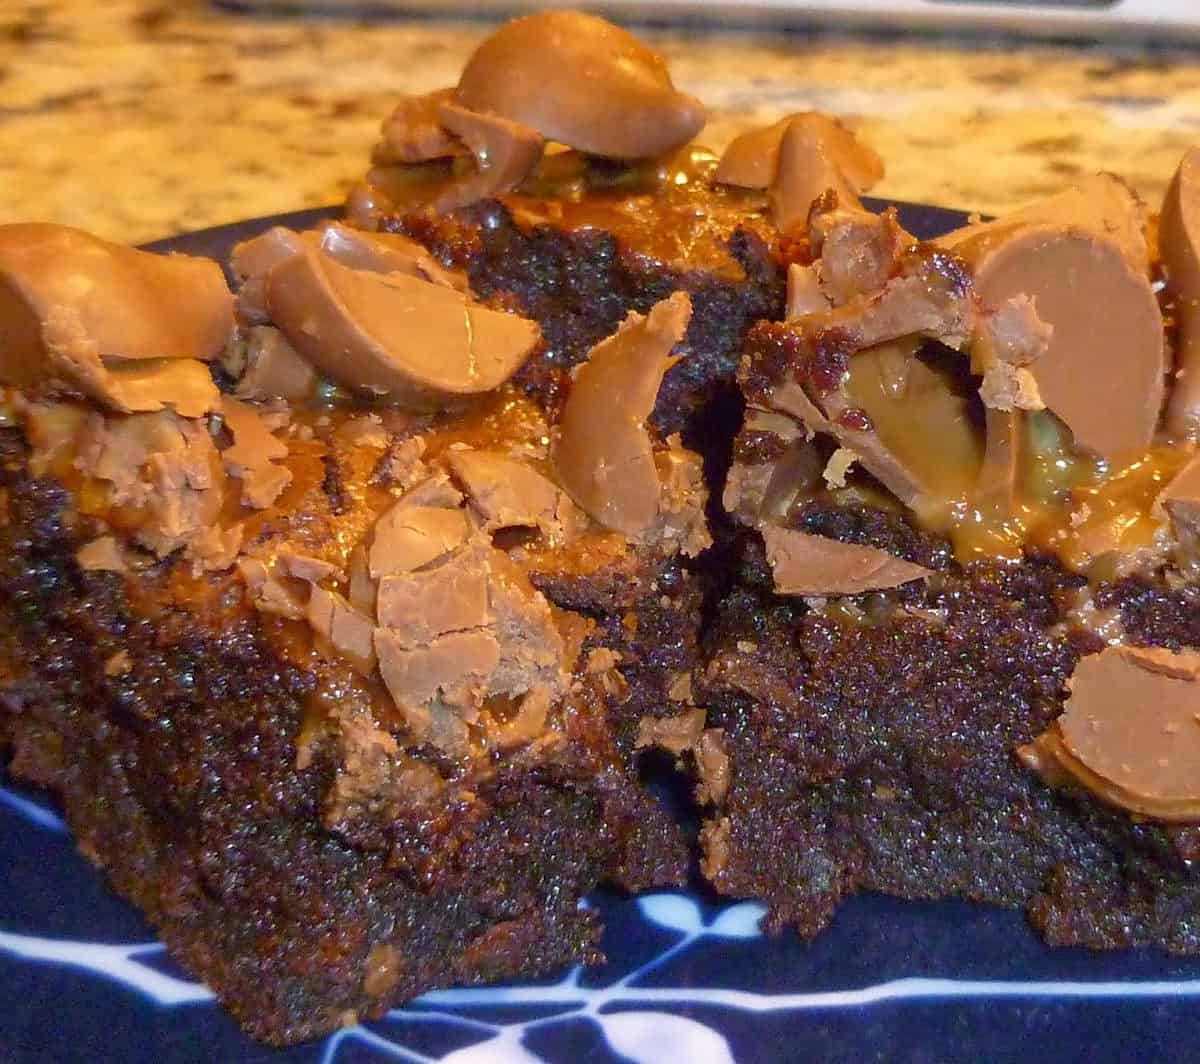  The secret to these brownies is using high-quality cocoa powder and chocolate chips.